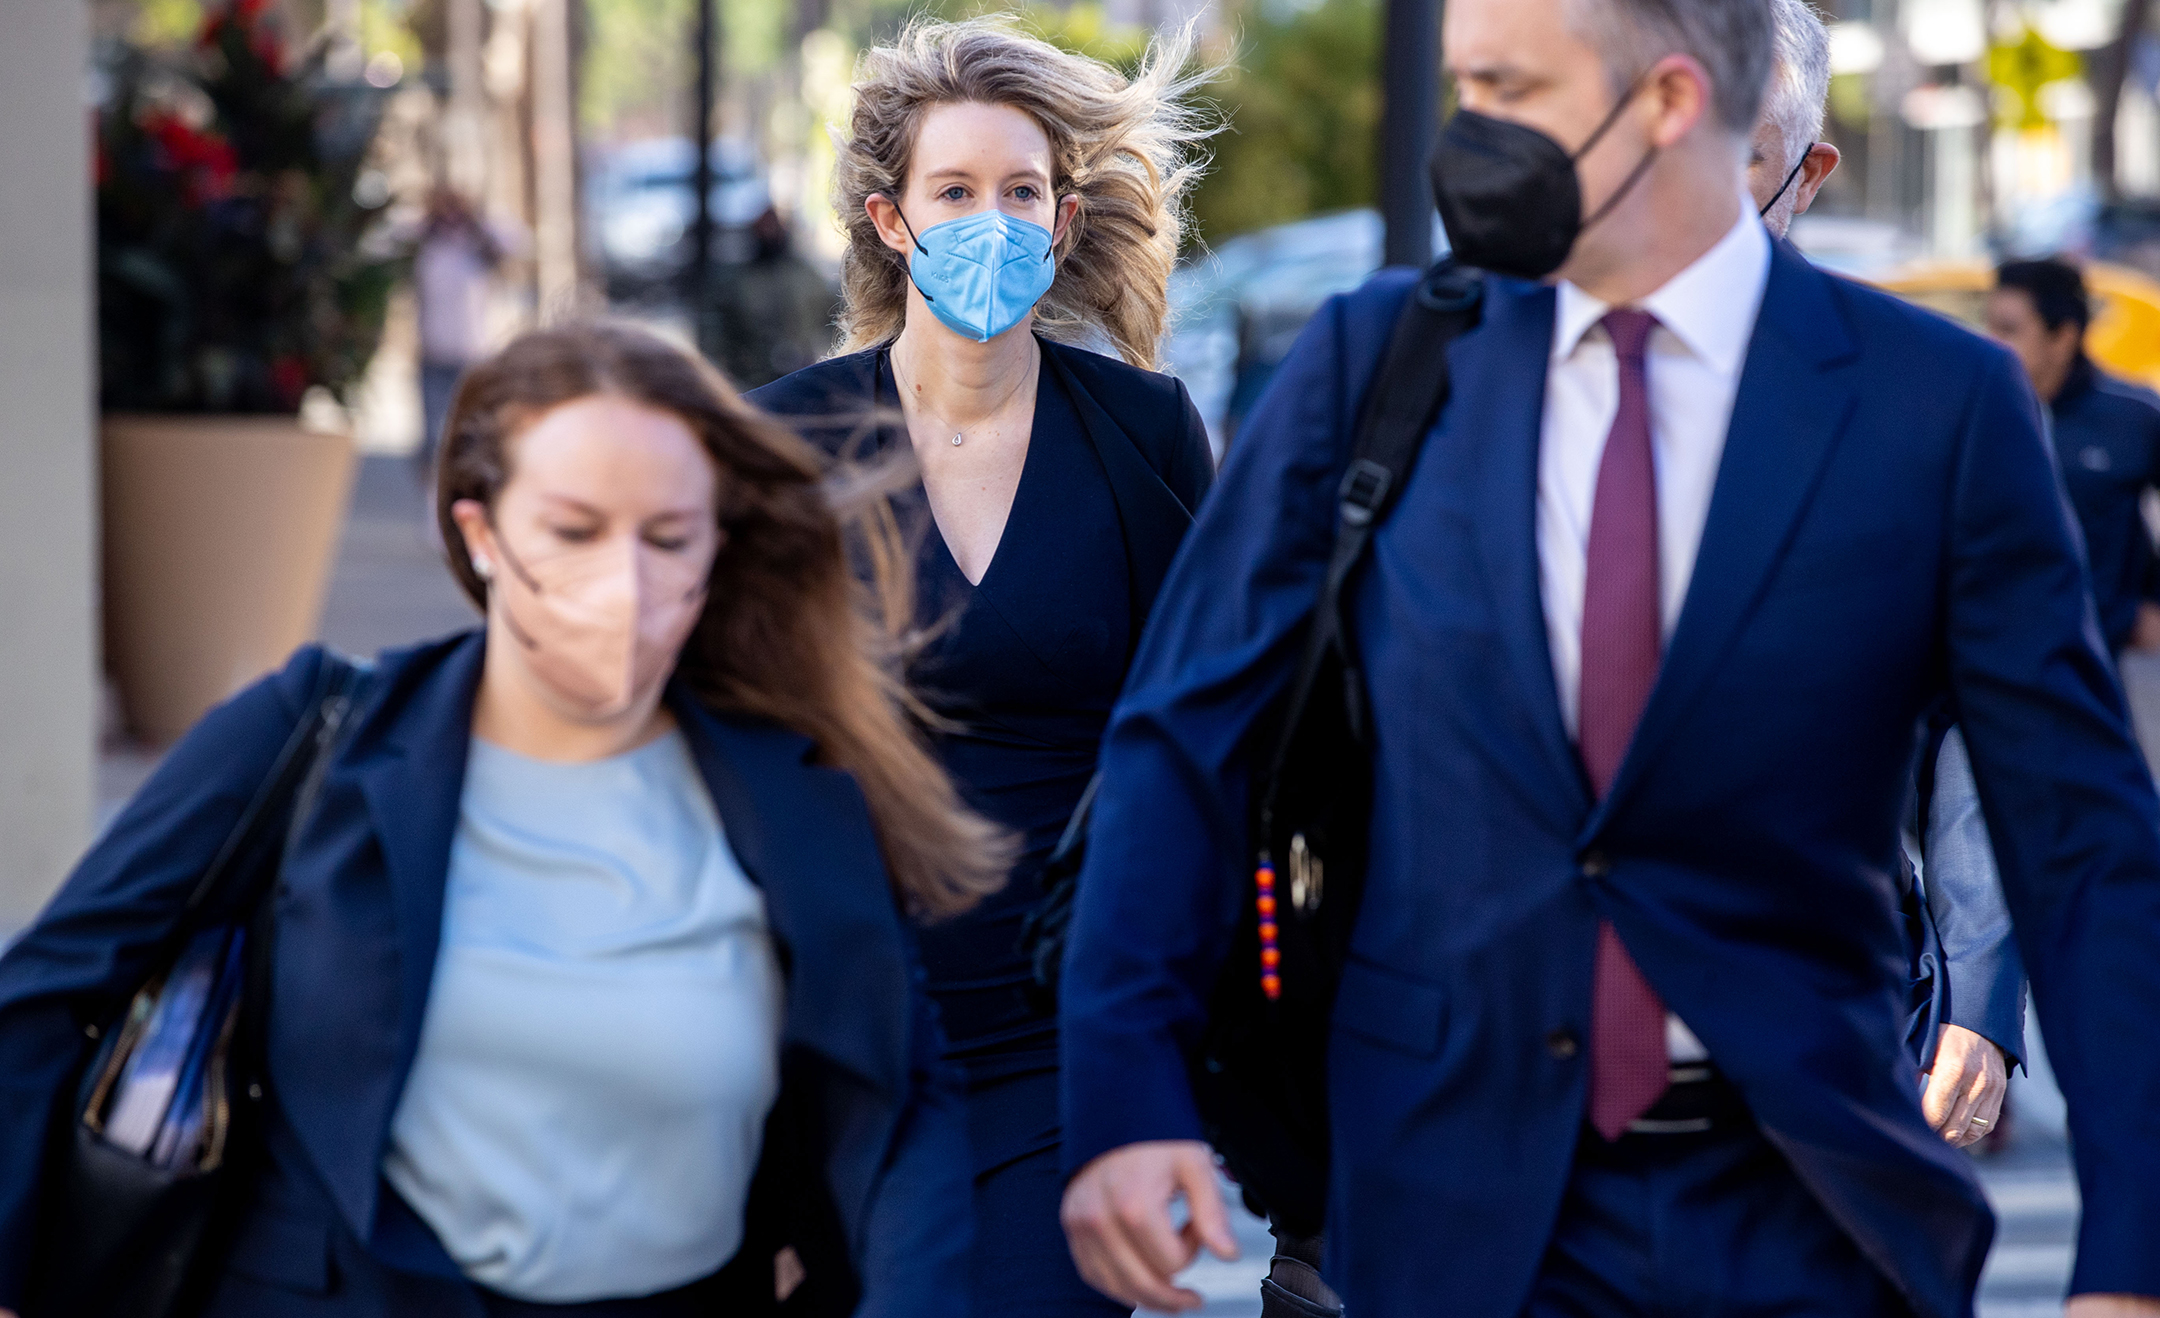 Tall blonde woman wearing a business suit and face mask walks behind two people, also masked, into a courtroom